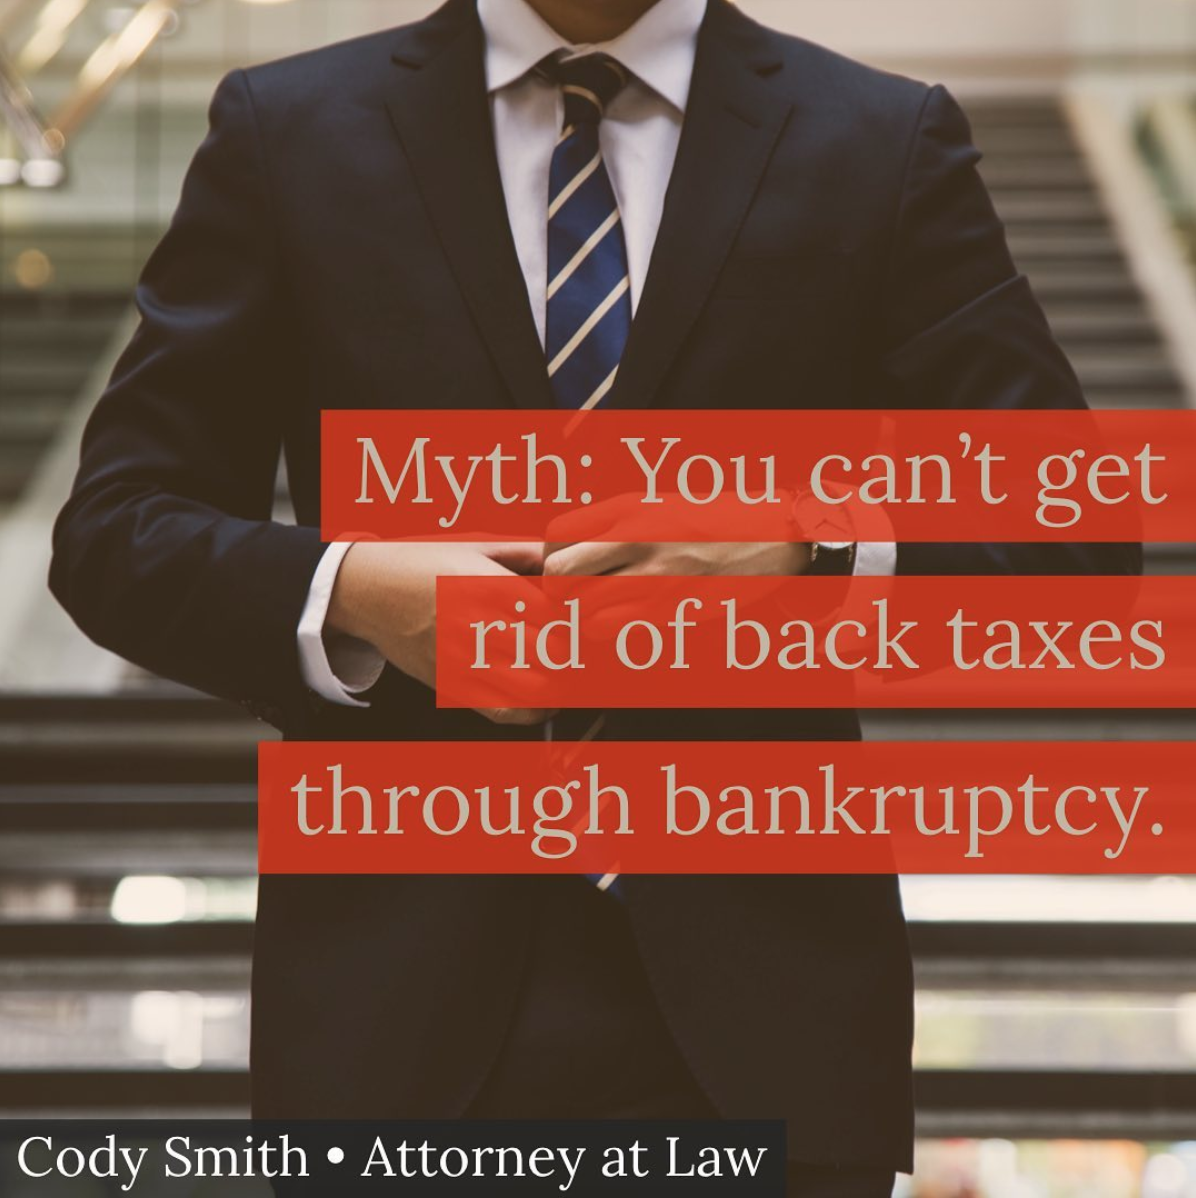 MYTH: You can't get rid of back taxes in bankruptcy.